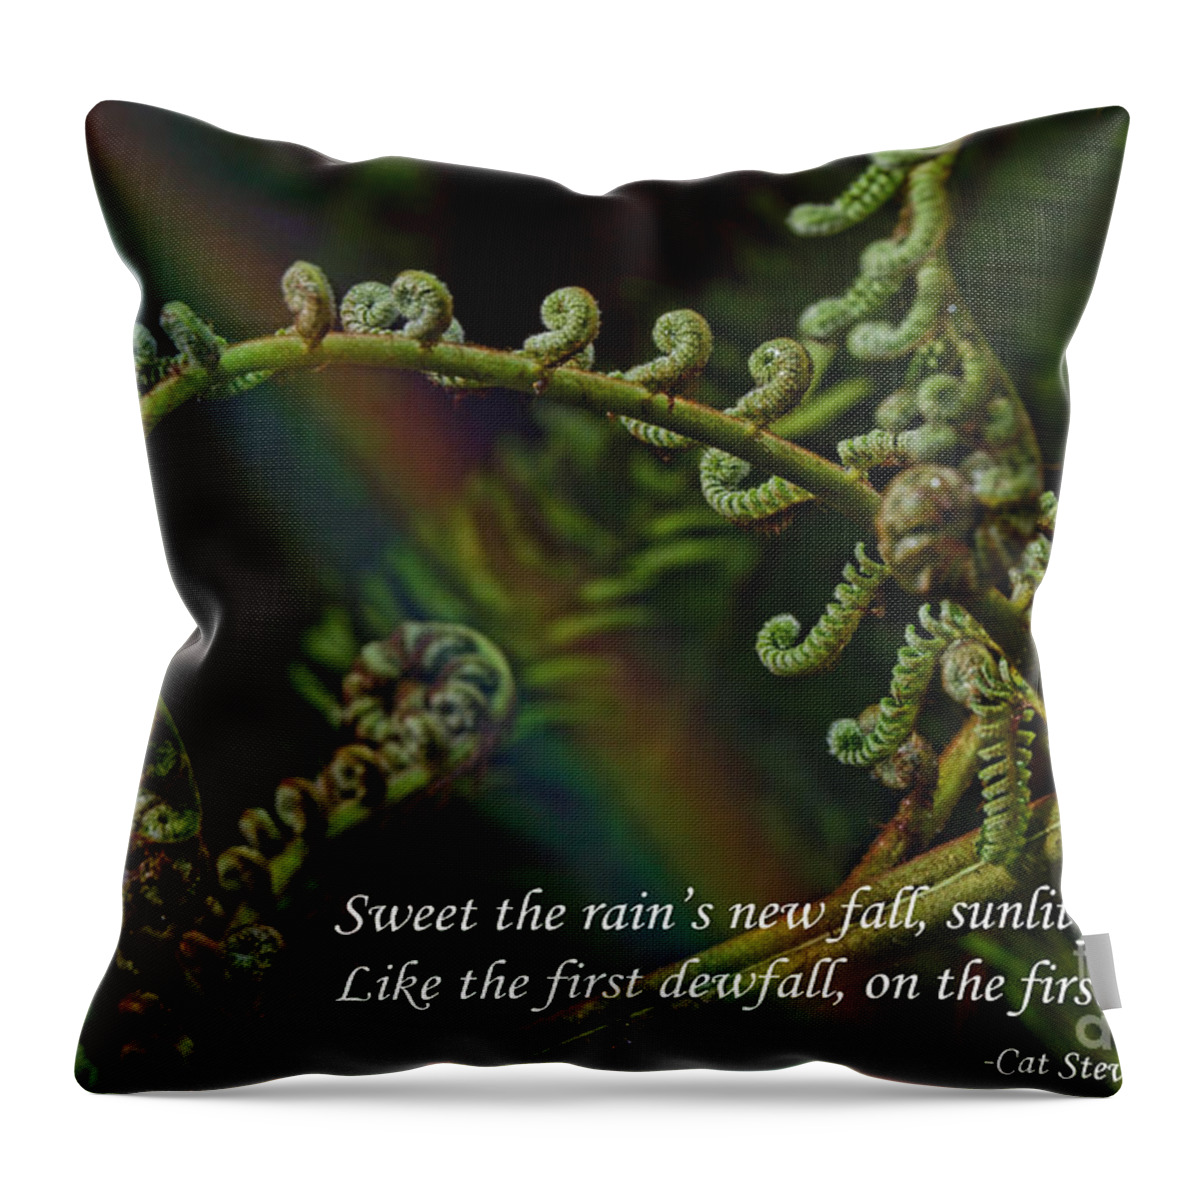 Cat Stevens Throw Pillow featuring the photograph Sweet the Rain's New Fall by Jim Fitzpatrick